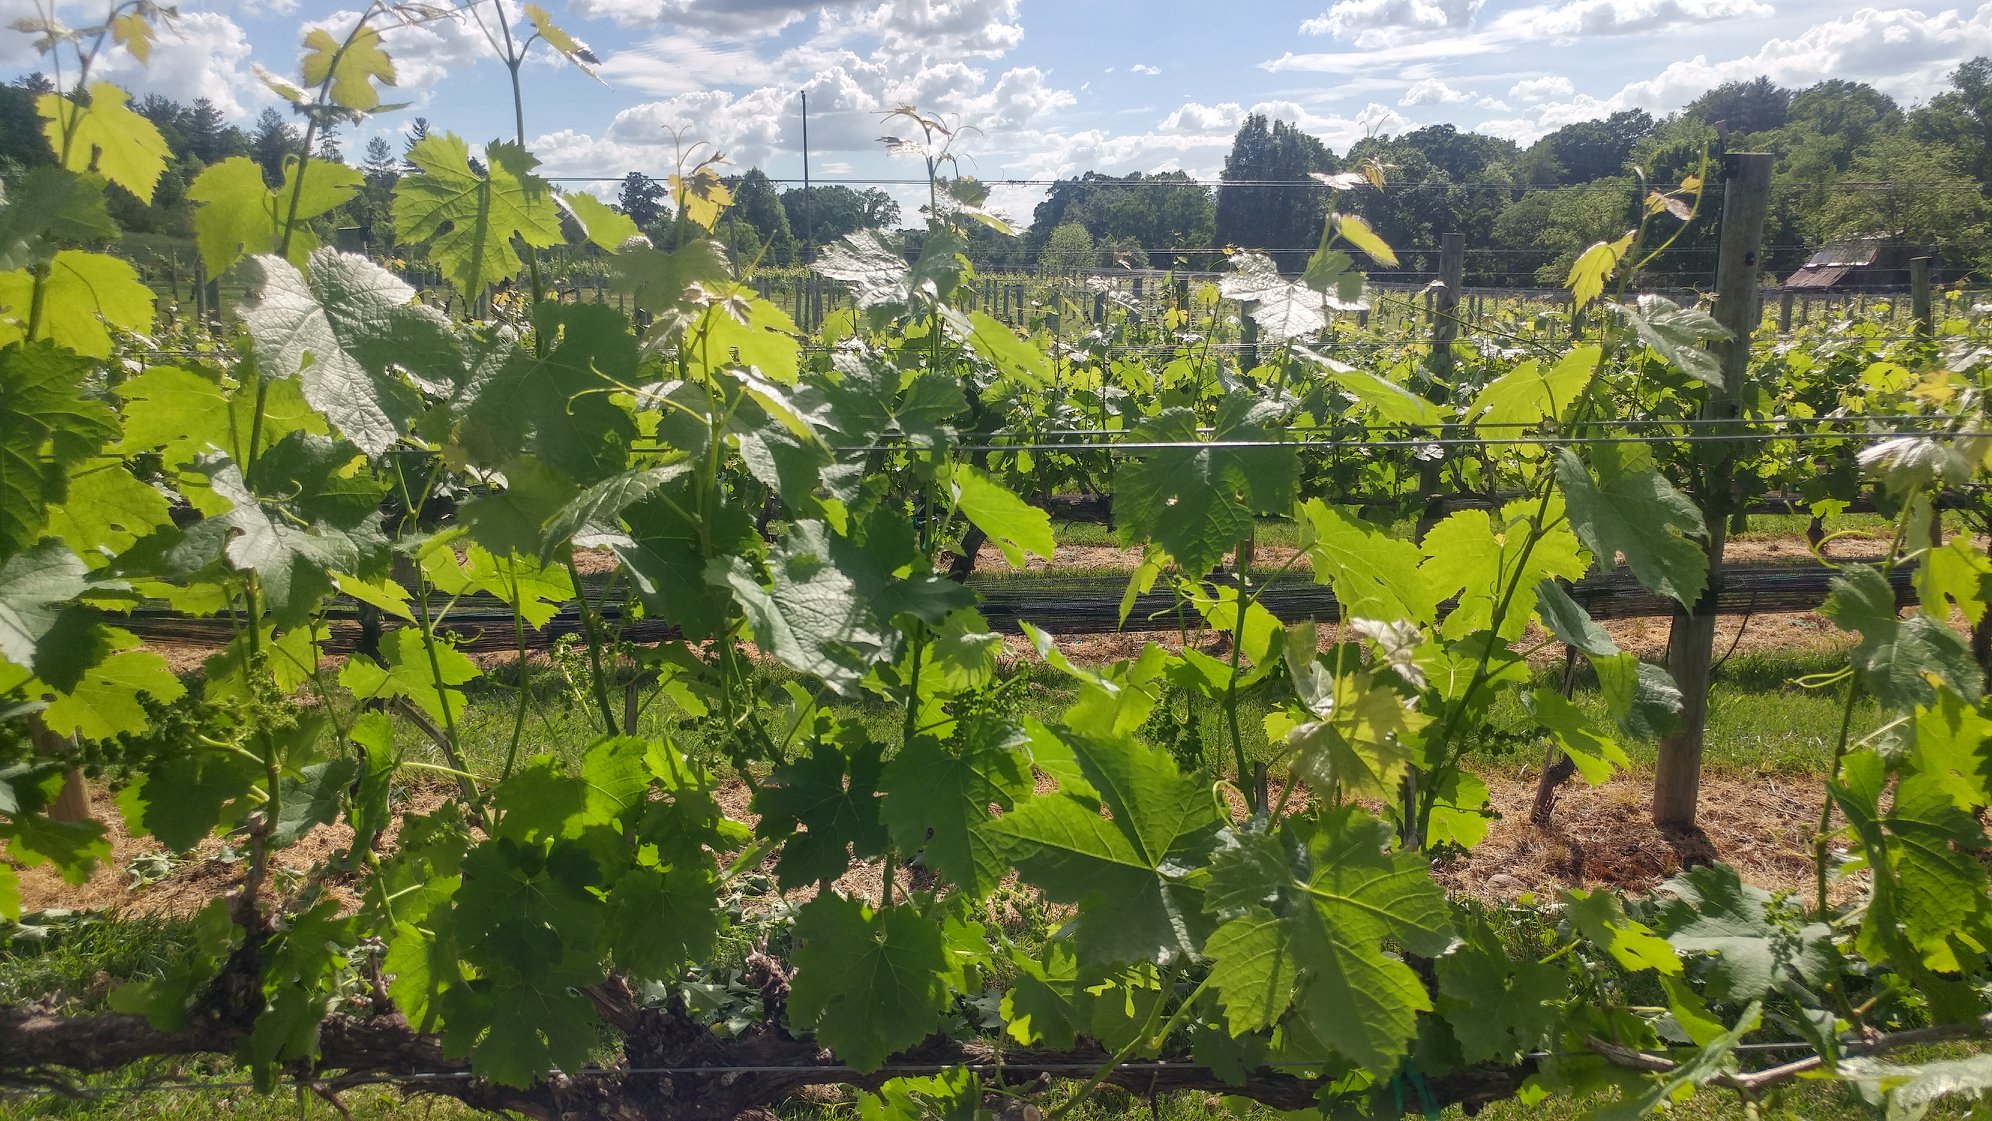 Nottely River Valley Vineyards Opens for the 2019 Season on April 26, 2019